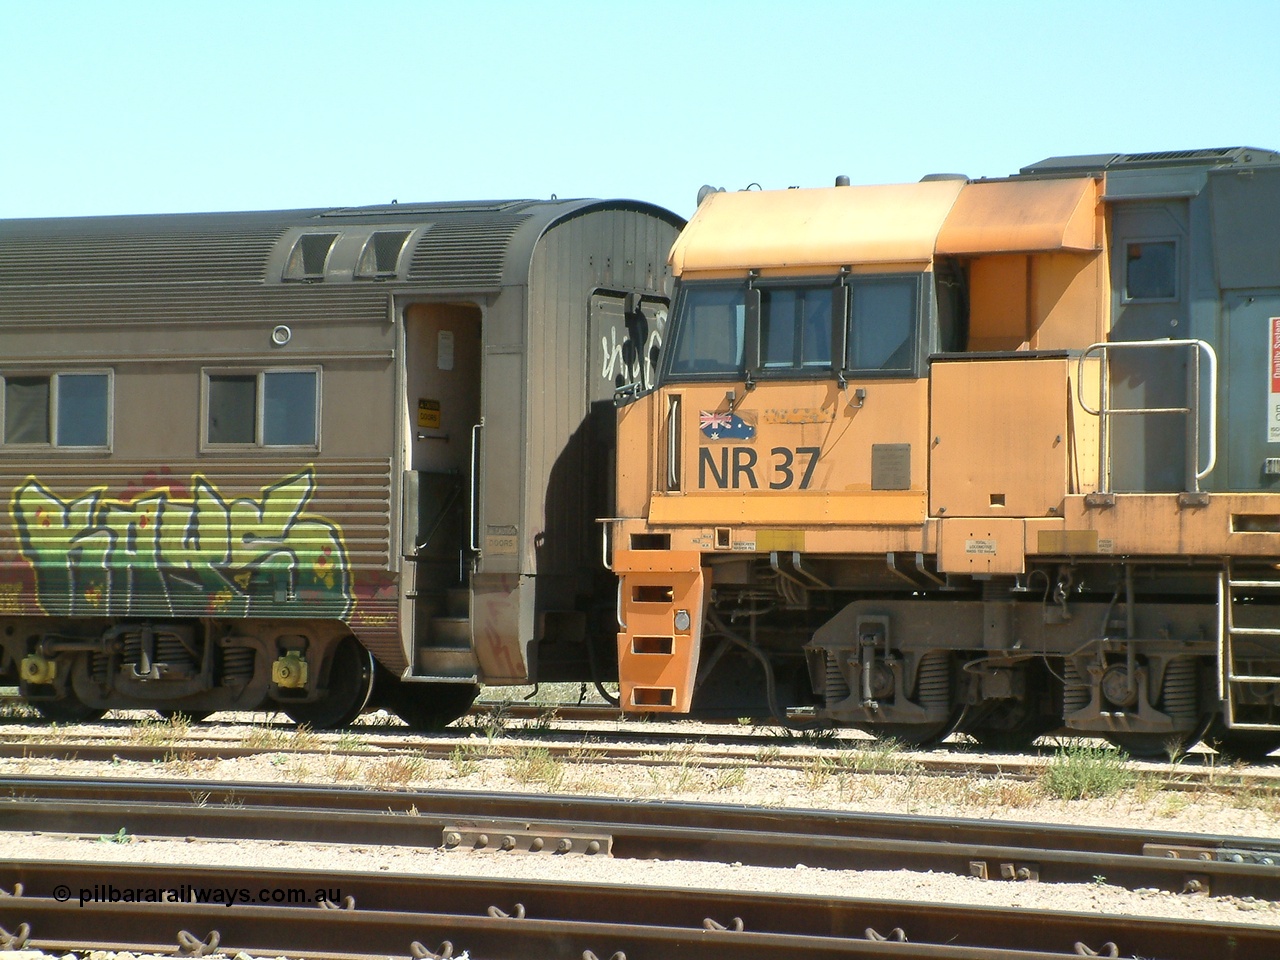 030404 125253
Port Augusta Spencer Junction yard, a Perth bound intermodal awaits departure time on 13 Road behind National Rail NR class unit built by Goninan as GE Cv40-9i models, NR 37 serial 7250-06 / 97-239. 4th April 2003.
Keywords: NR-class;NR37;7250-06/97-239;Goninan;GE;Cv40-9i;